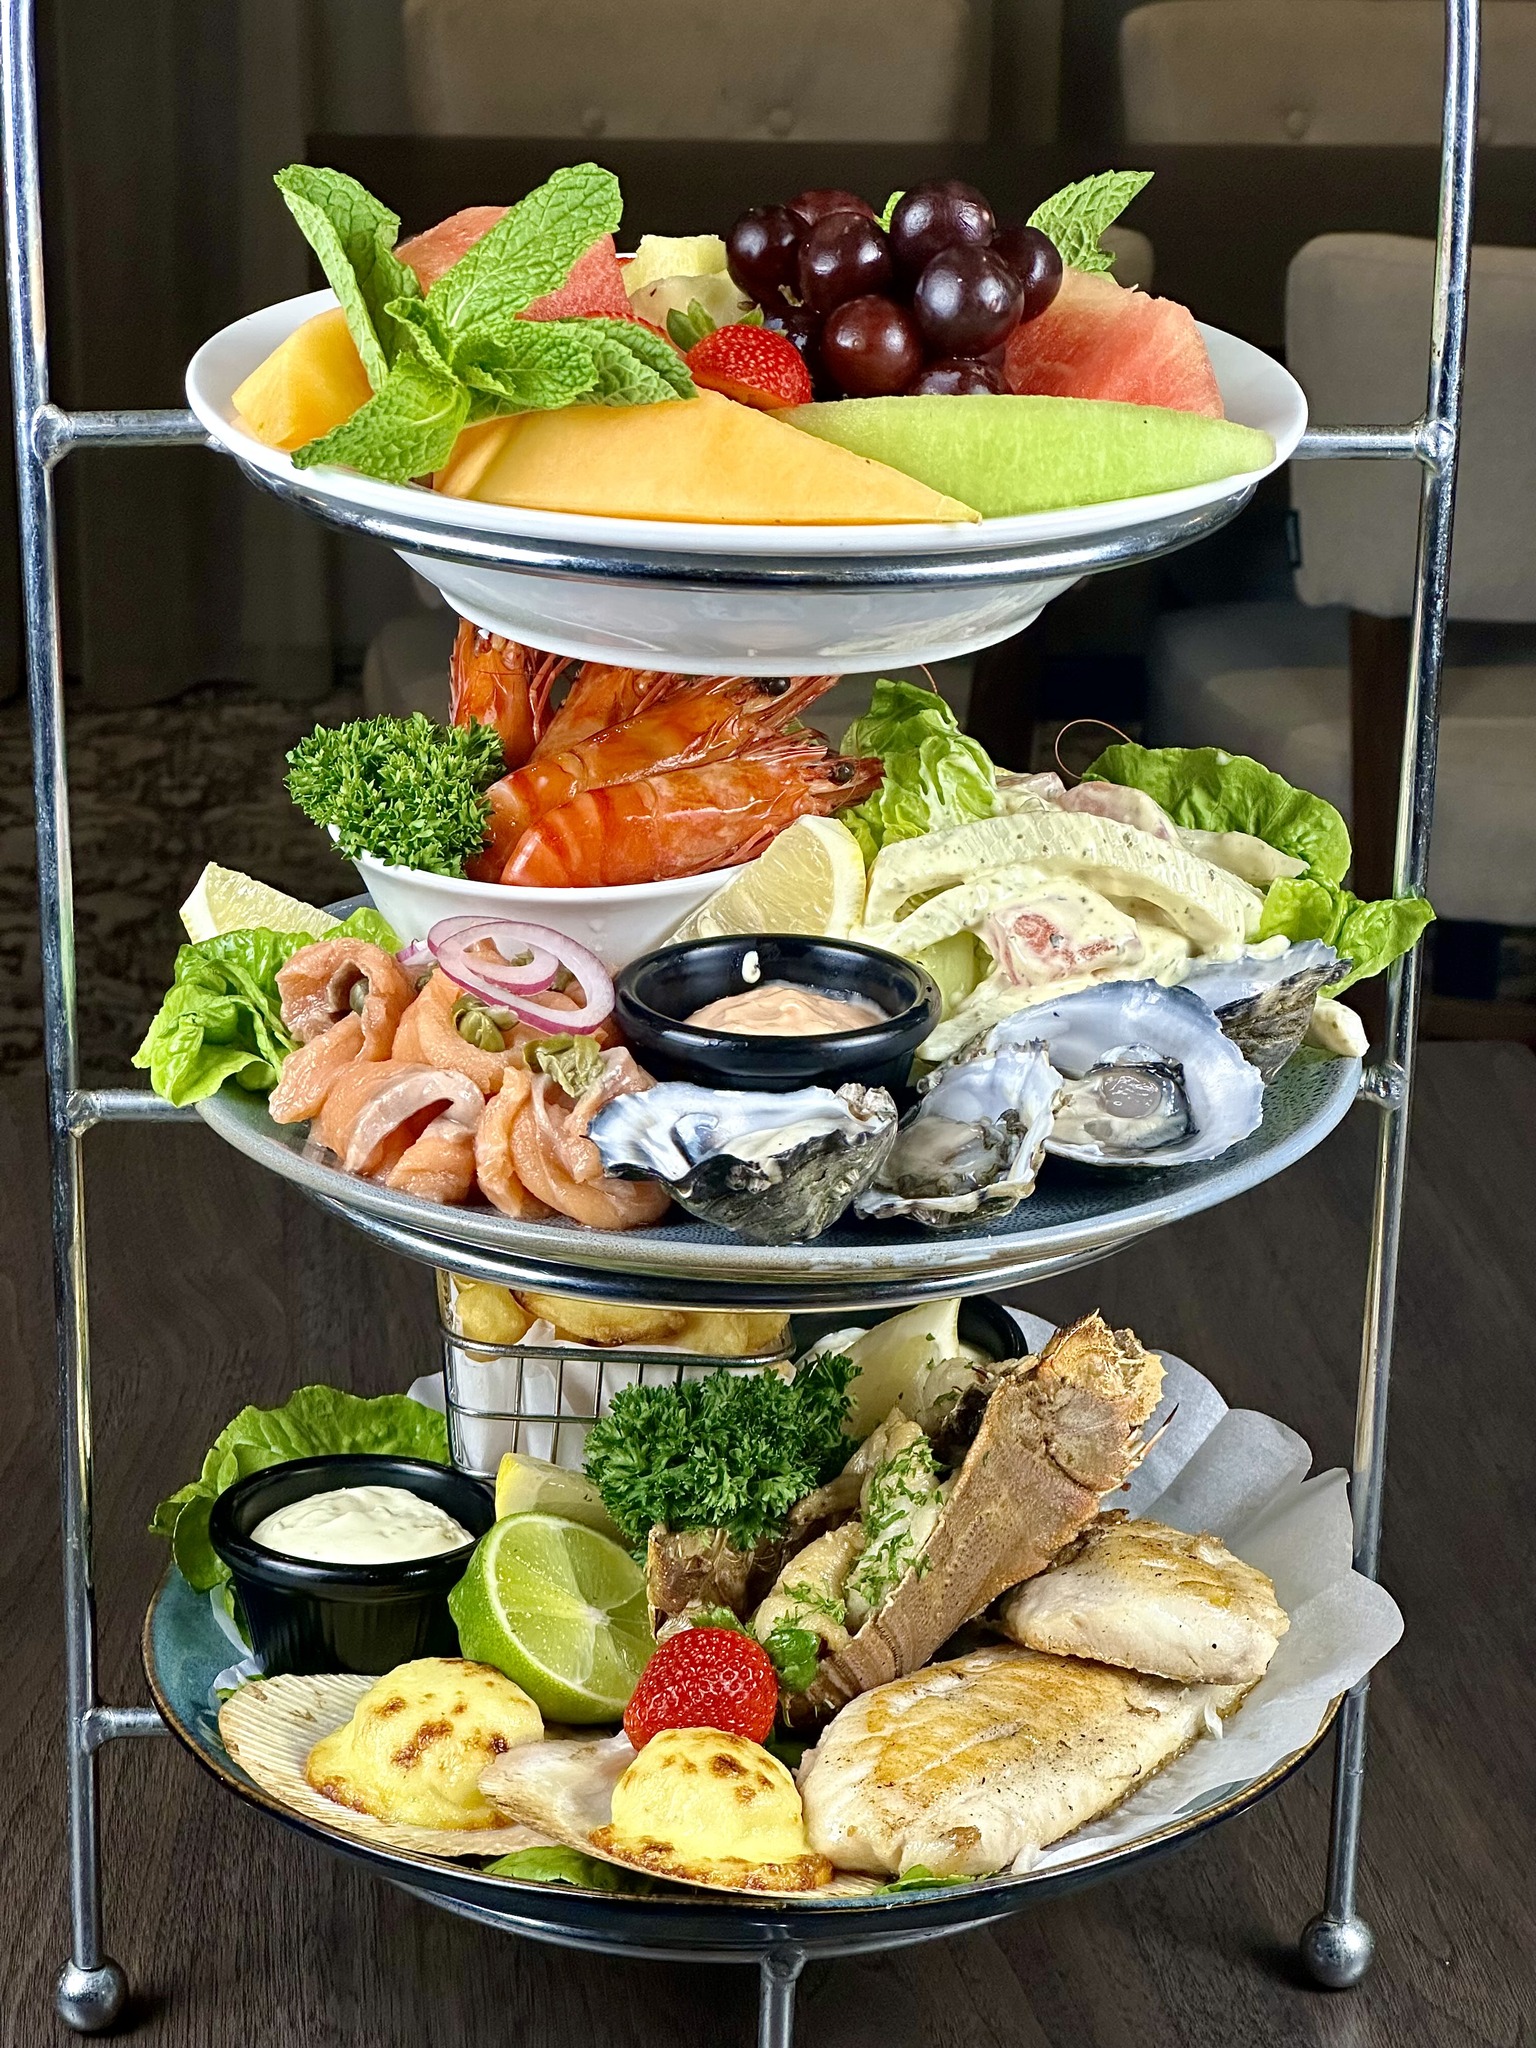 Shared seafood tower available at Jets Leagues Club for Mother's Day